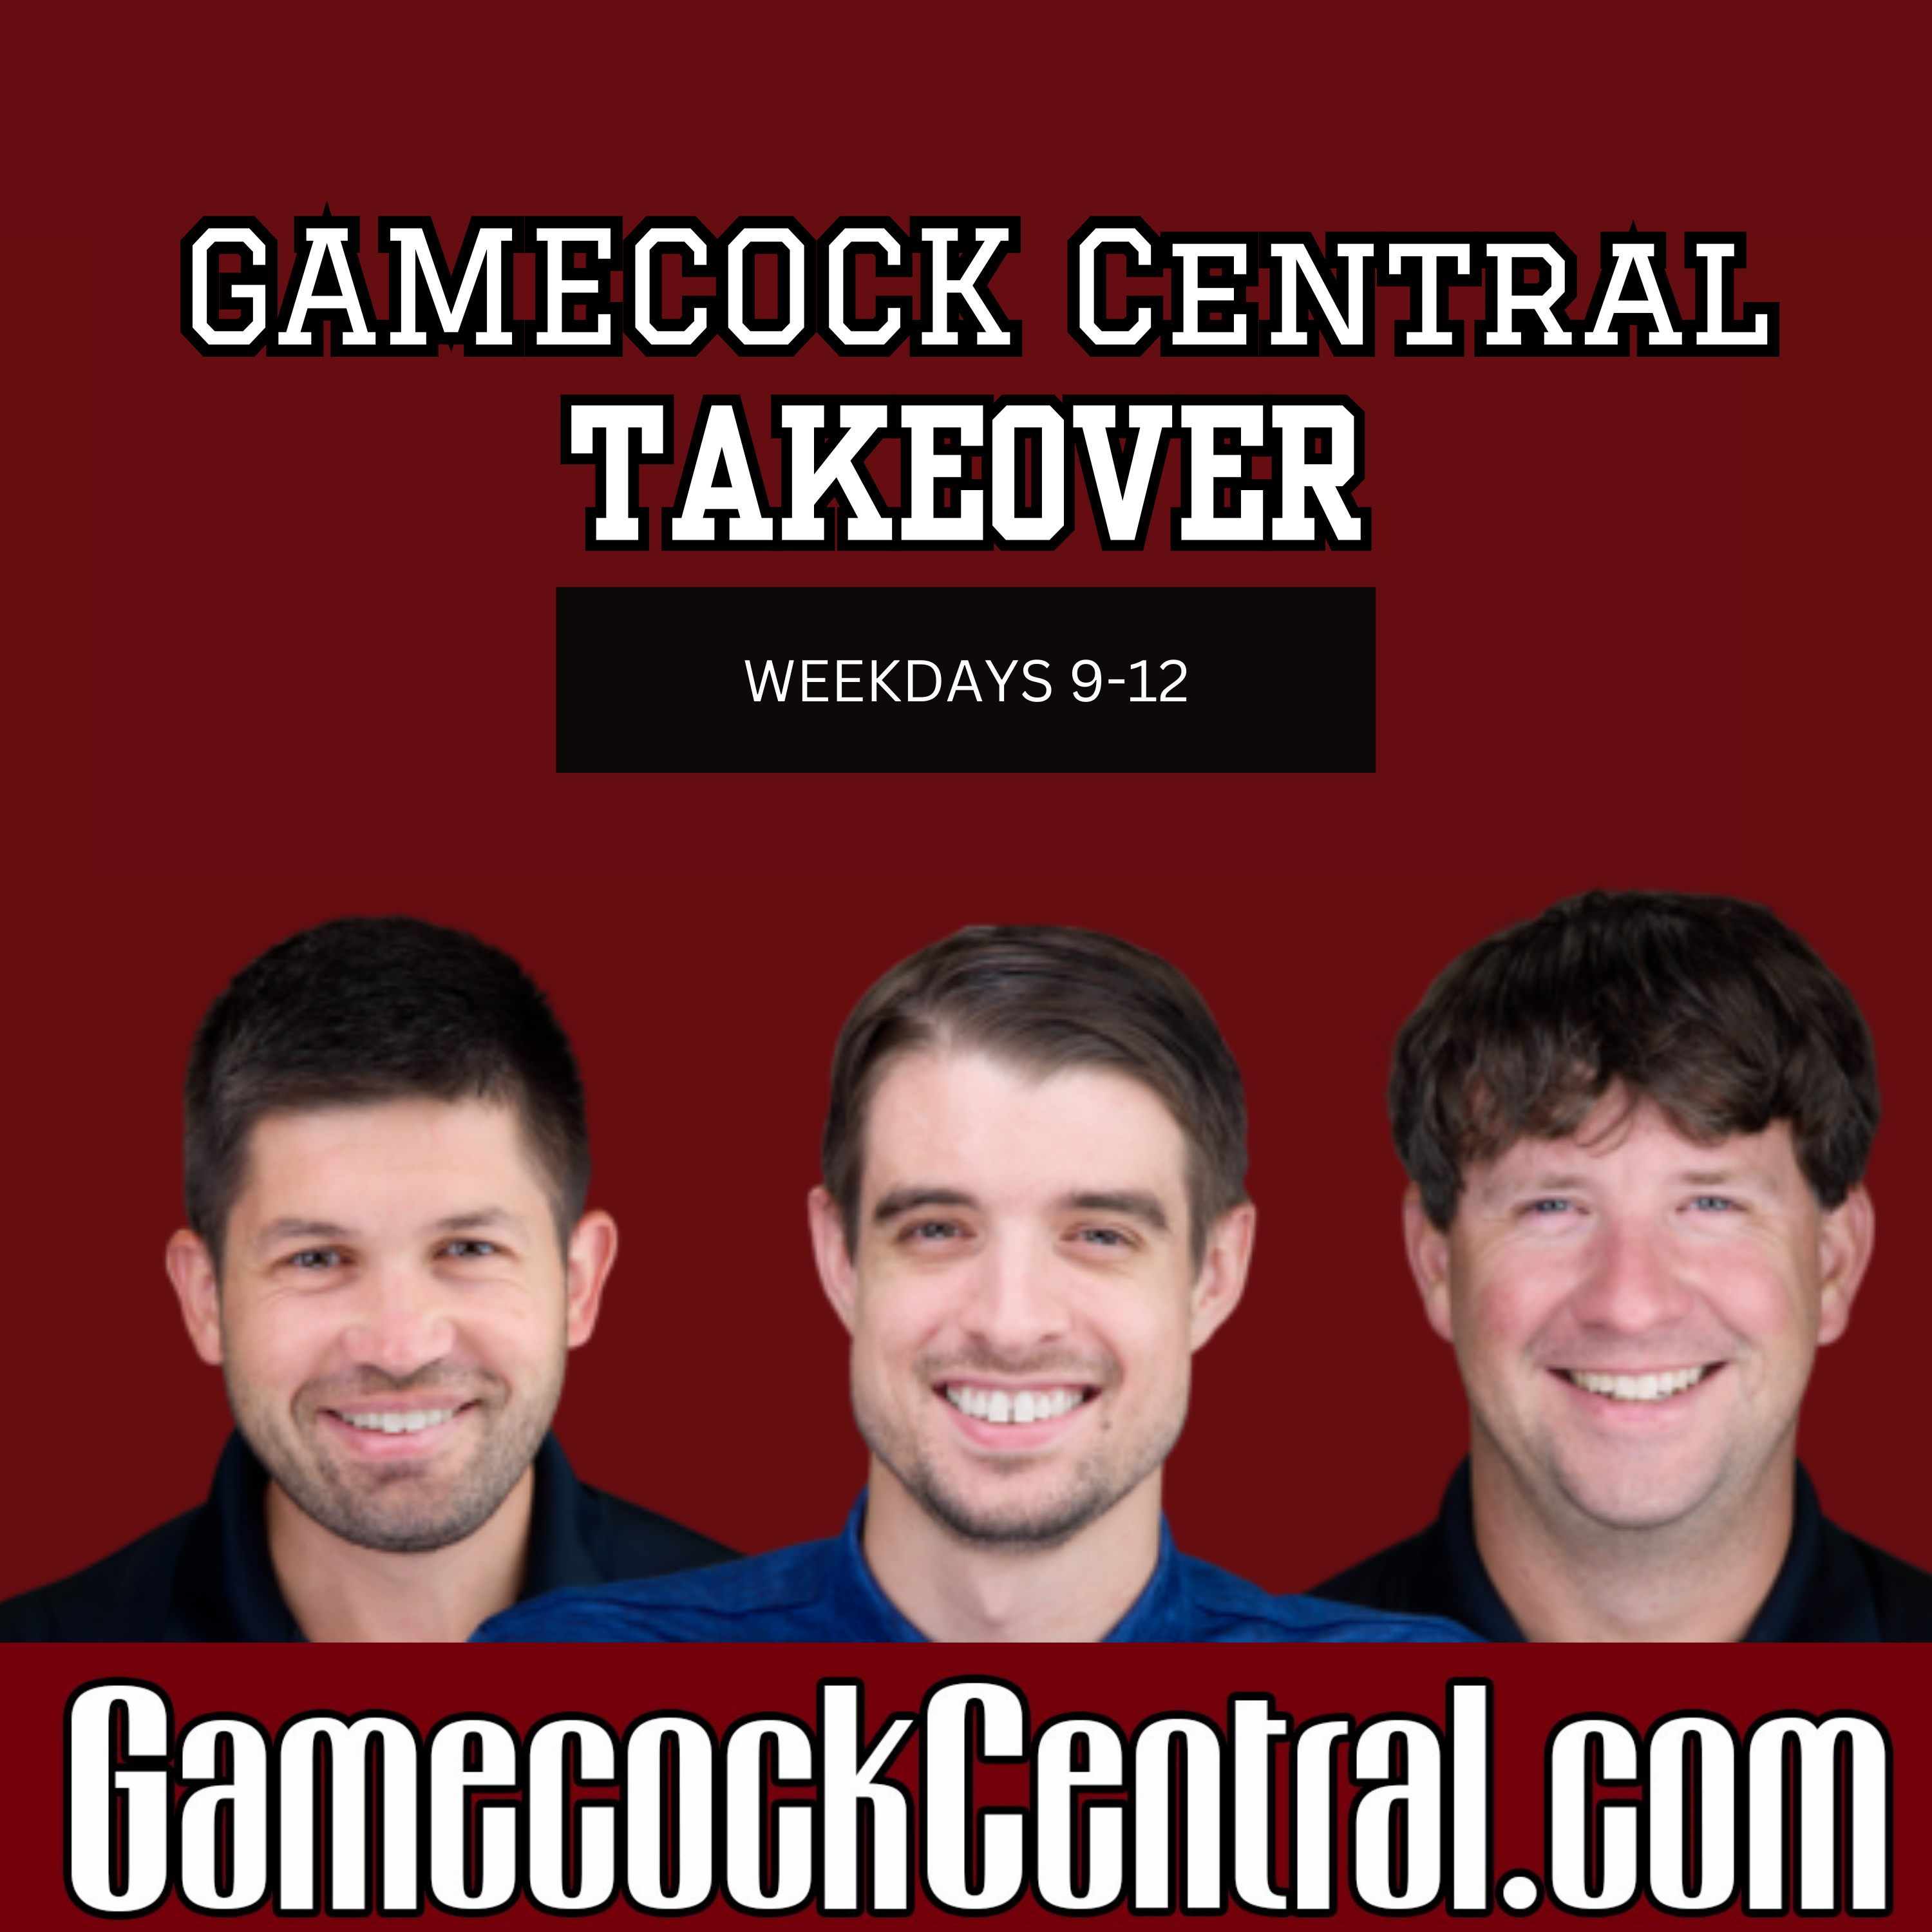 The Gamecock Central Pod